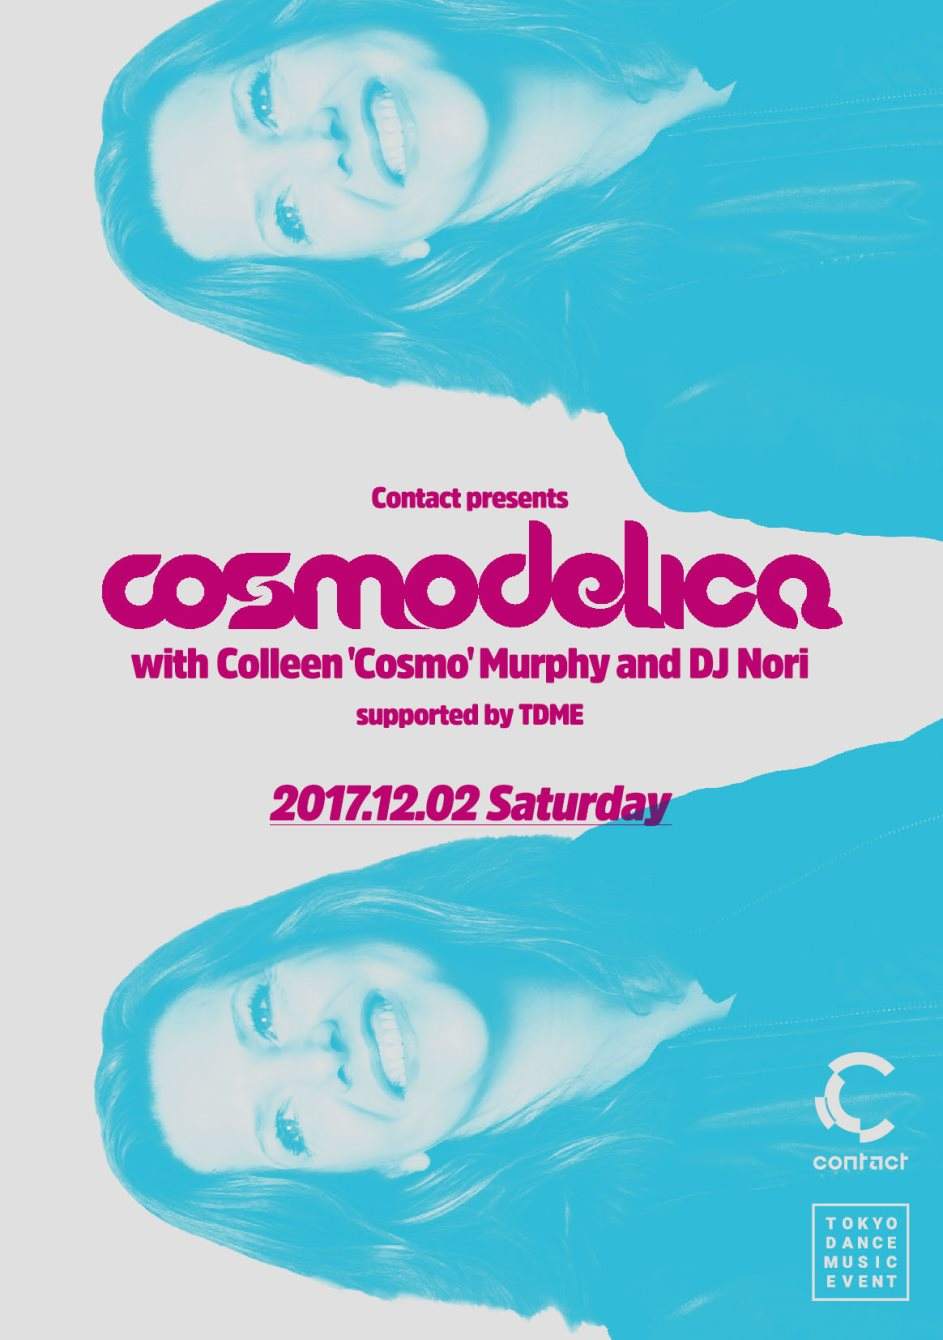 Contact presents Cosmodelica with Colleen 'Cosmo' Murphy and DJ Nori Supported by Tdme - Página frontal